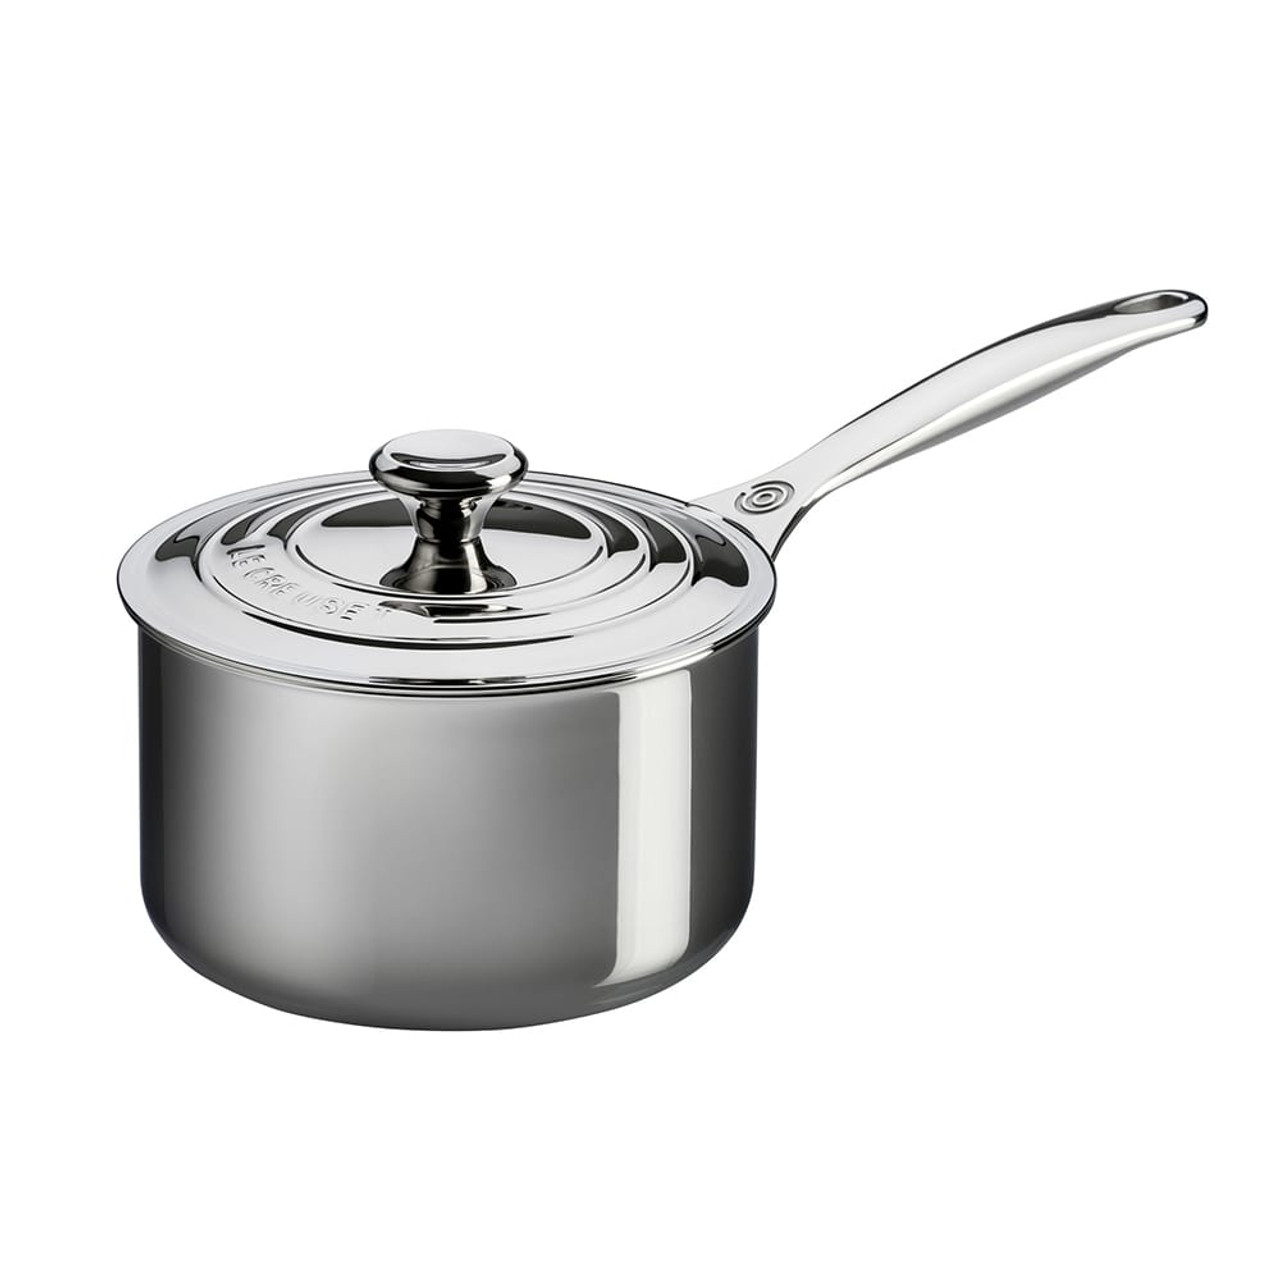 https://cdn11.bigcommerce.com/s-hccytny0od/images/stencil/1280x1280/products/3925/14288/le-creuset-stainless-steel-saucepan-2qt__38021.1612875233.jpg?c=2?imbypass=on